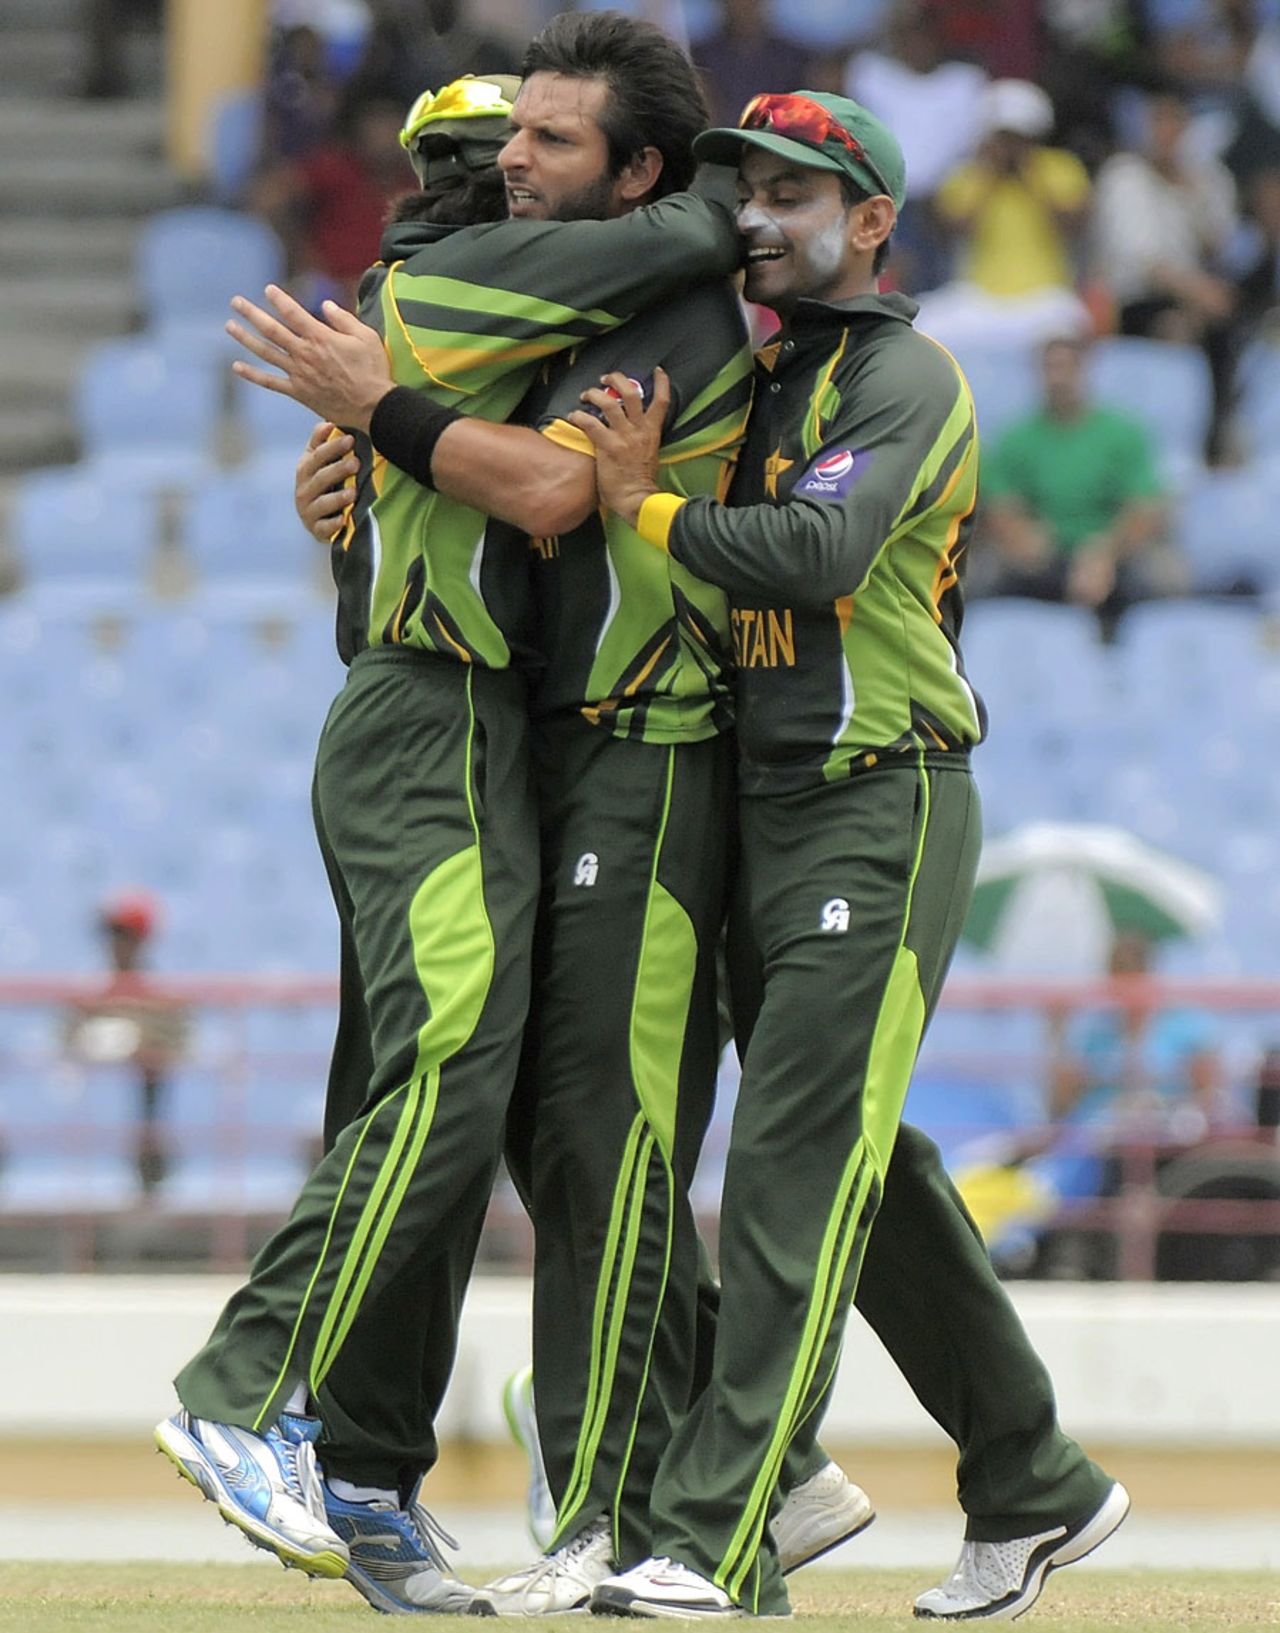 Pakistan and Shahid Afridi are relieved after Chris Gayle's fall, West Indies v Pakistan, 4th ODI, St Lucia, July 21, 2013